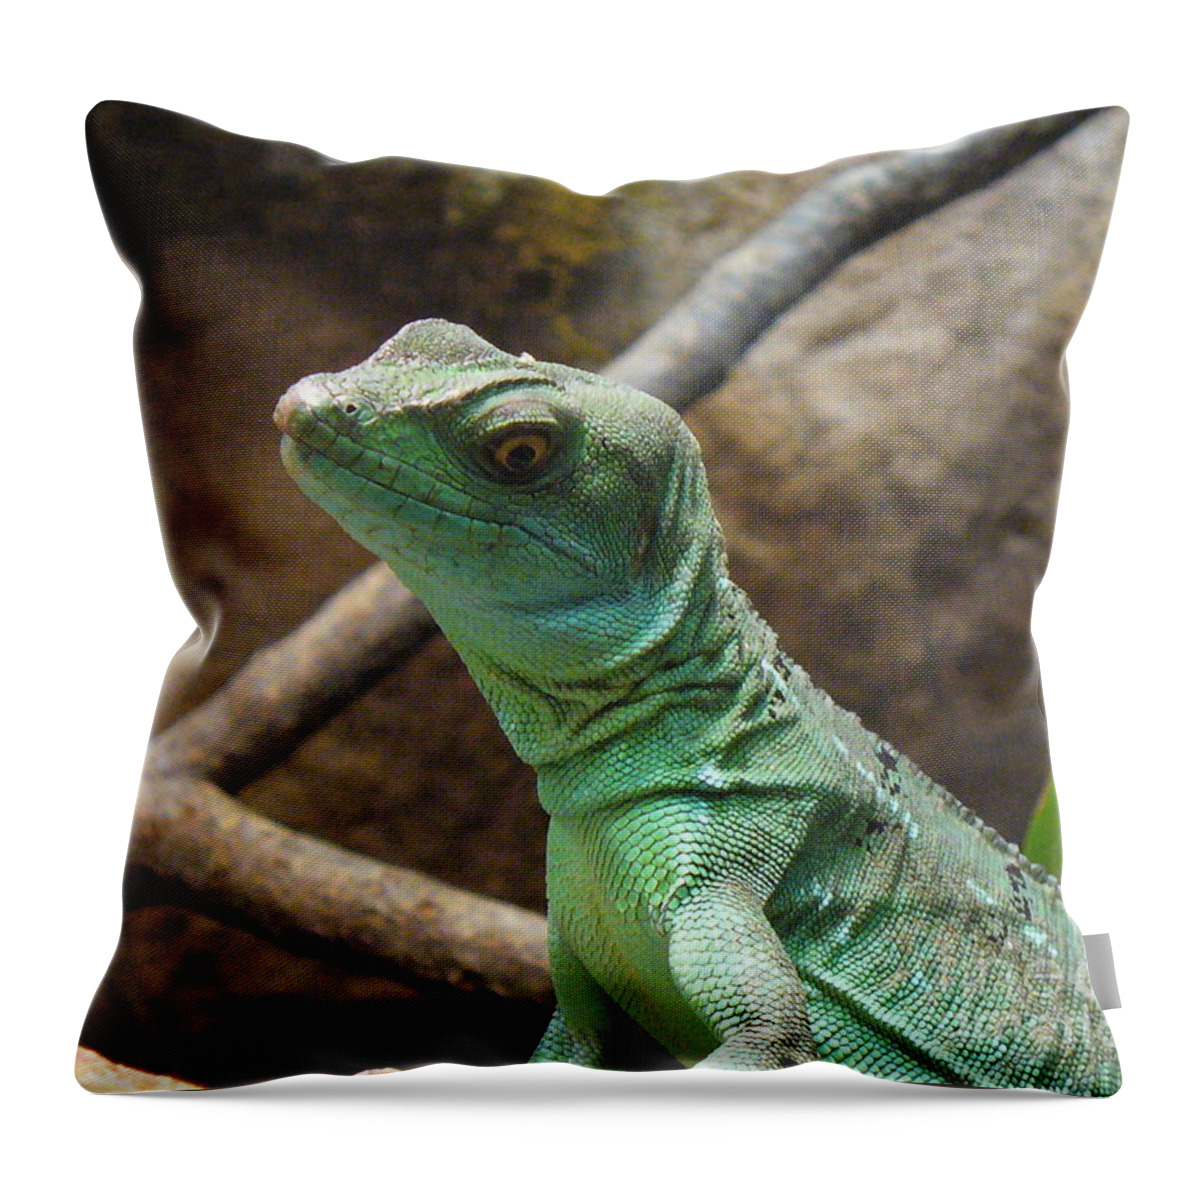 Reptile Throw Pillow featuring the photograph Dazed and Confused by Lingfai Leung